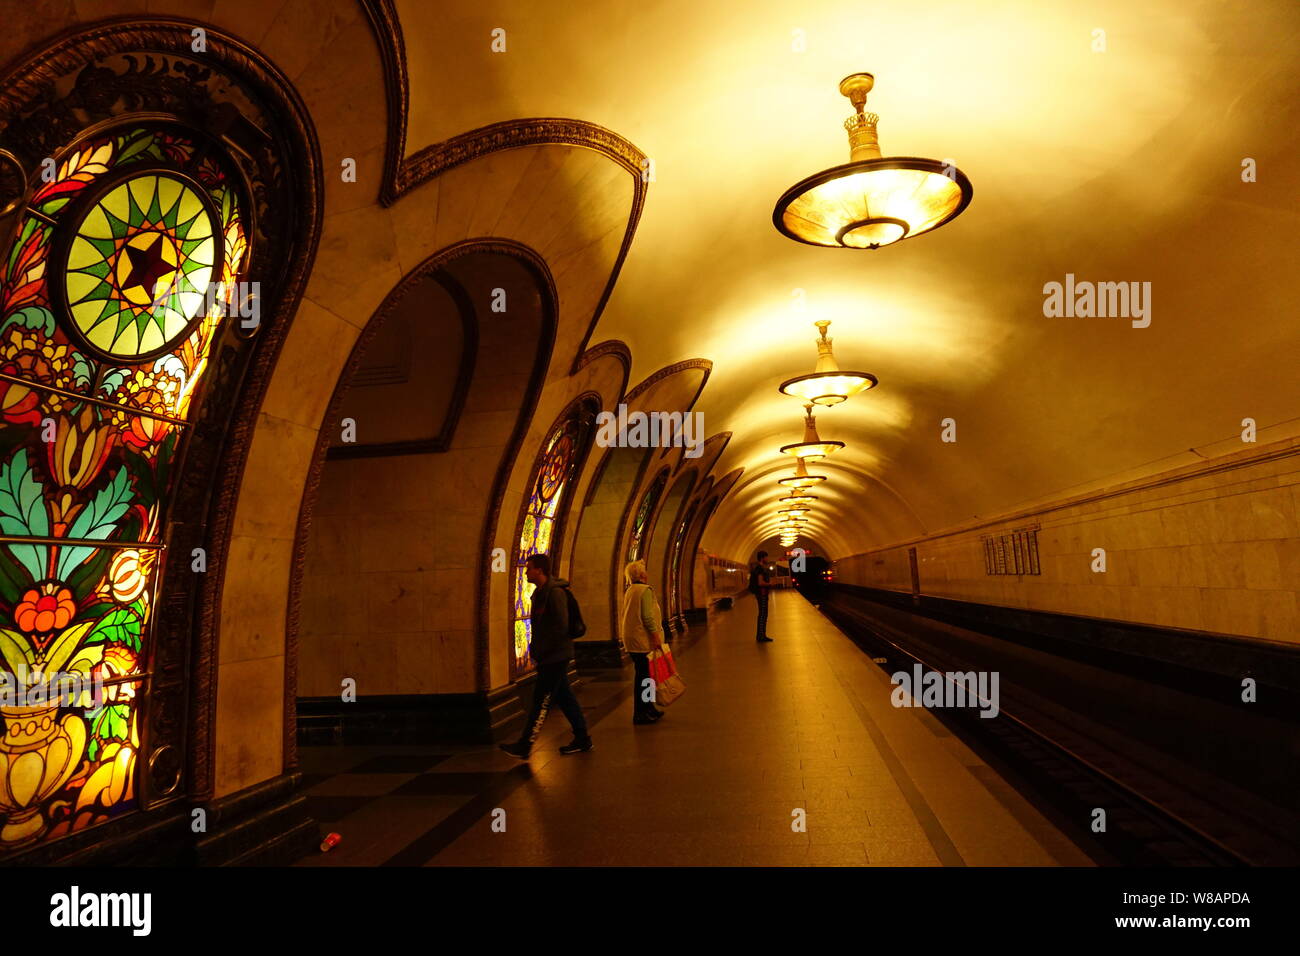 The interior of Moscow Metro Station in Moscow, Russia. Stock Photo